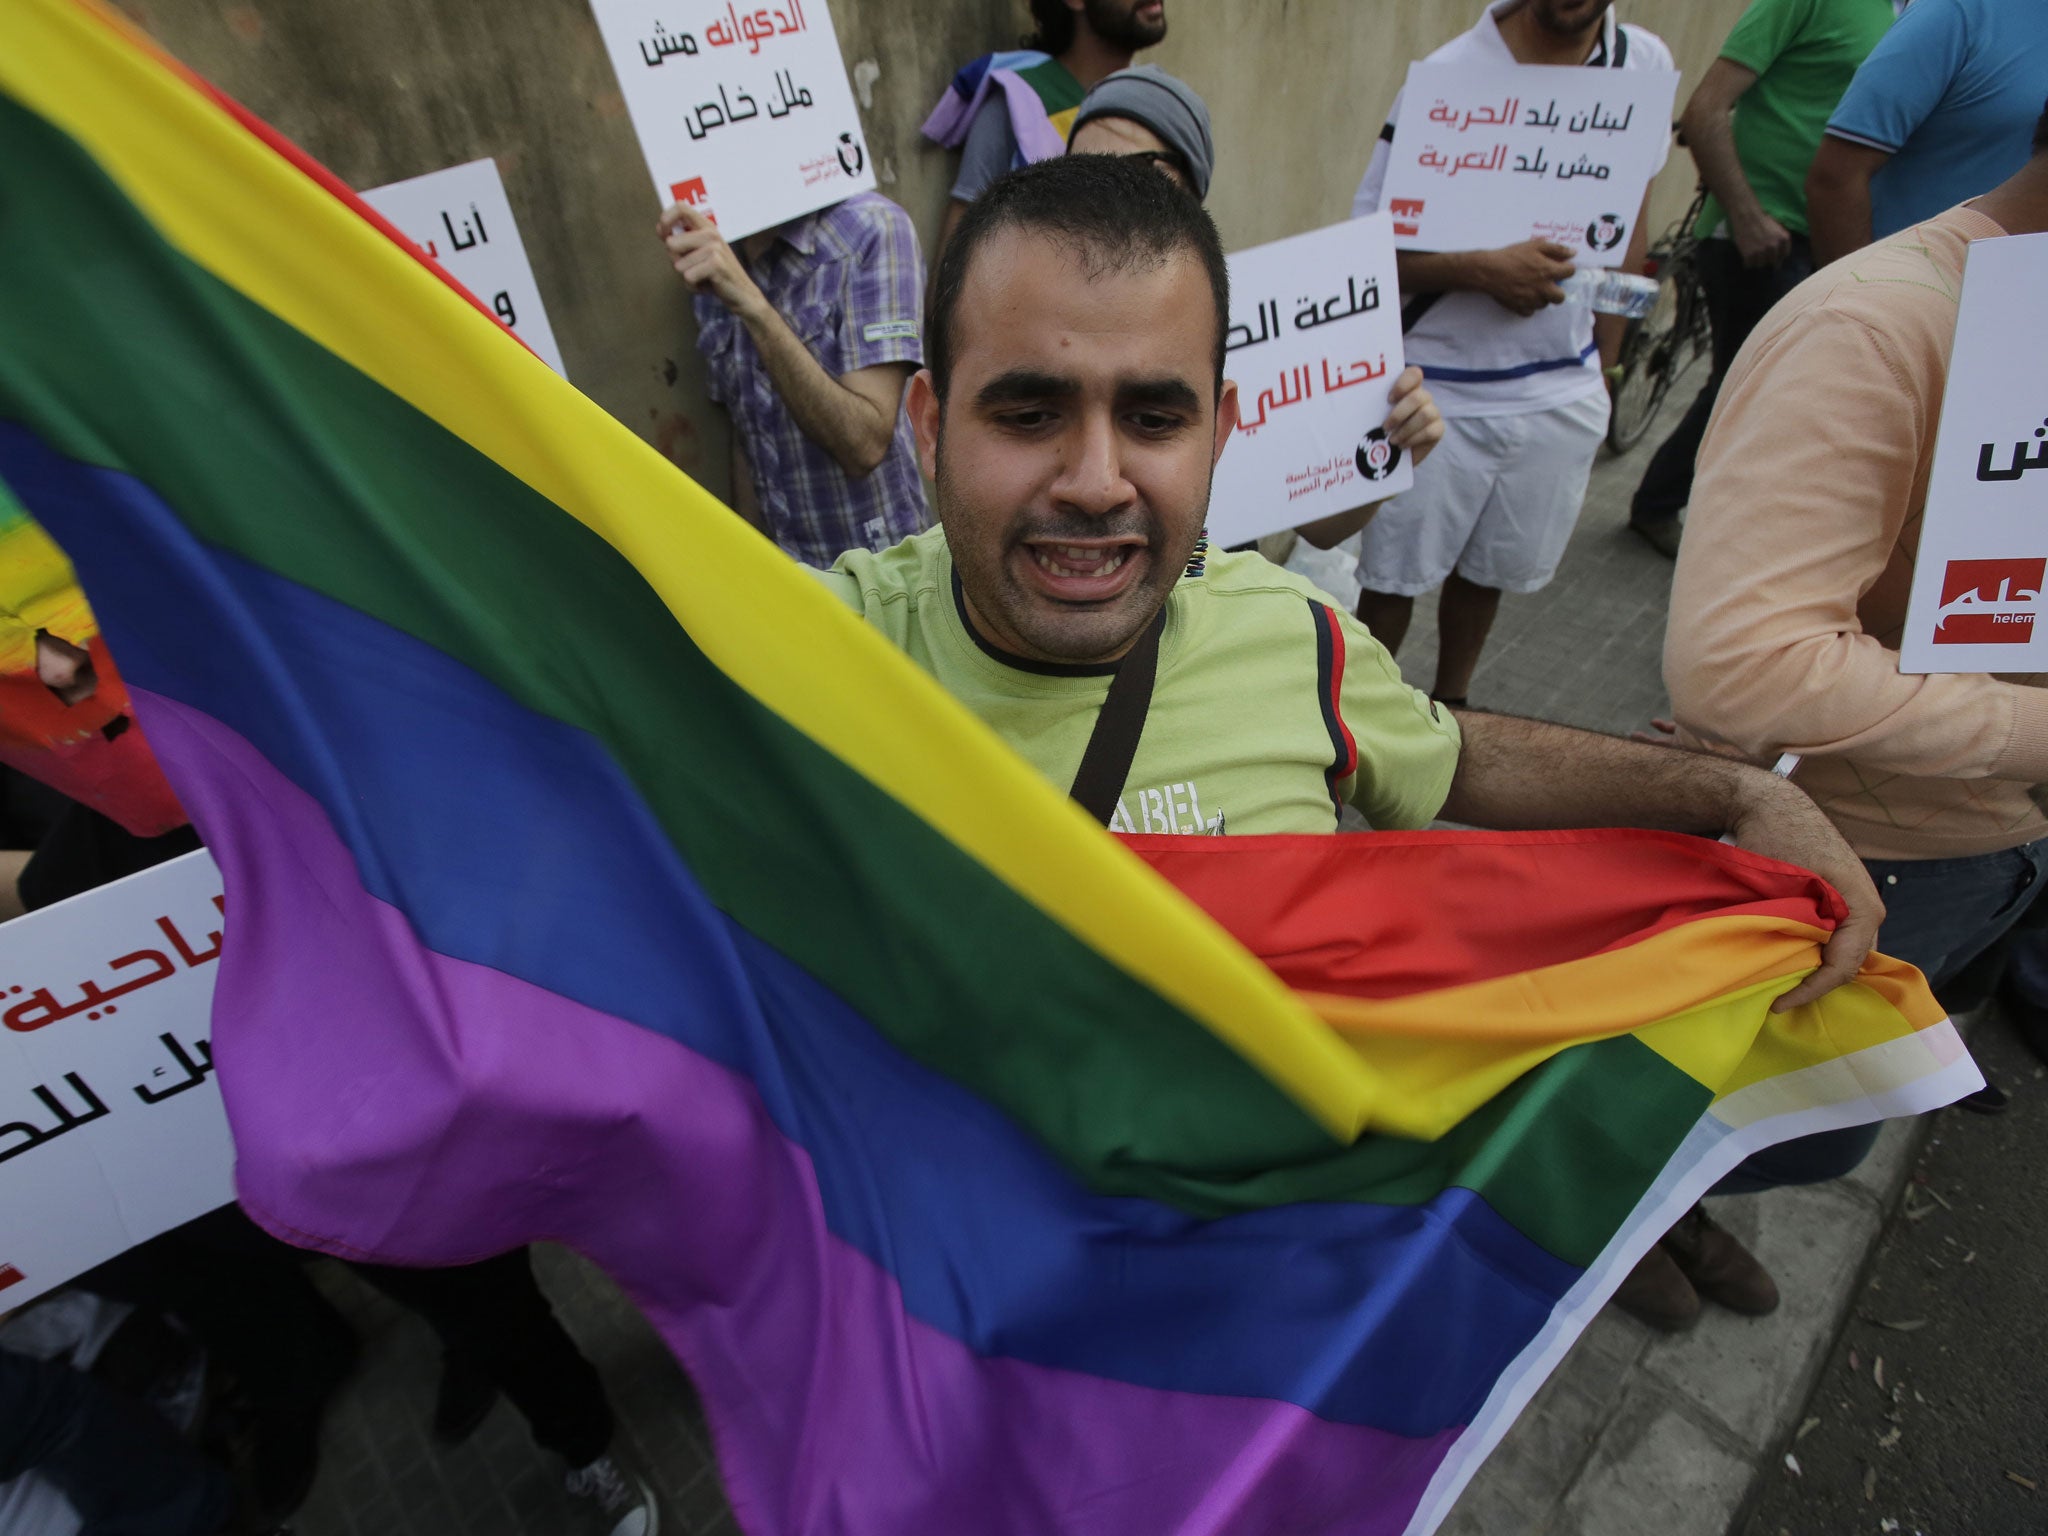 A protester waves a gay pride flag as others hold banners during an anti-homophobia rally in Beirut on April 30, 2013